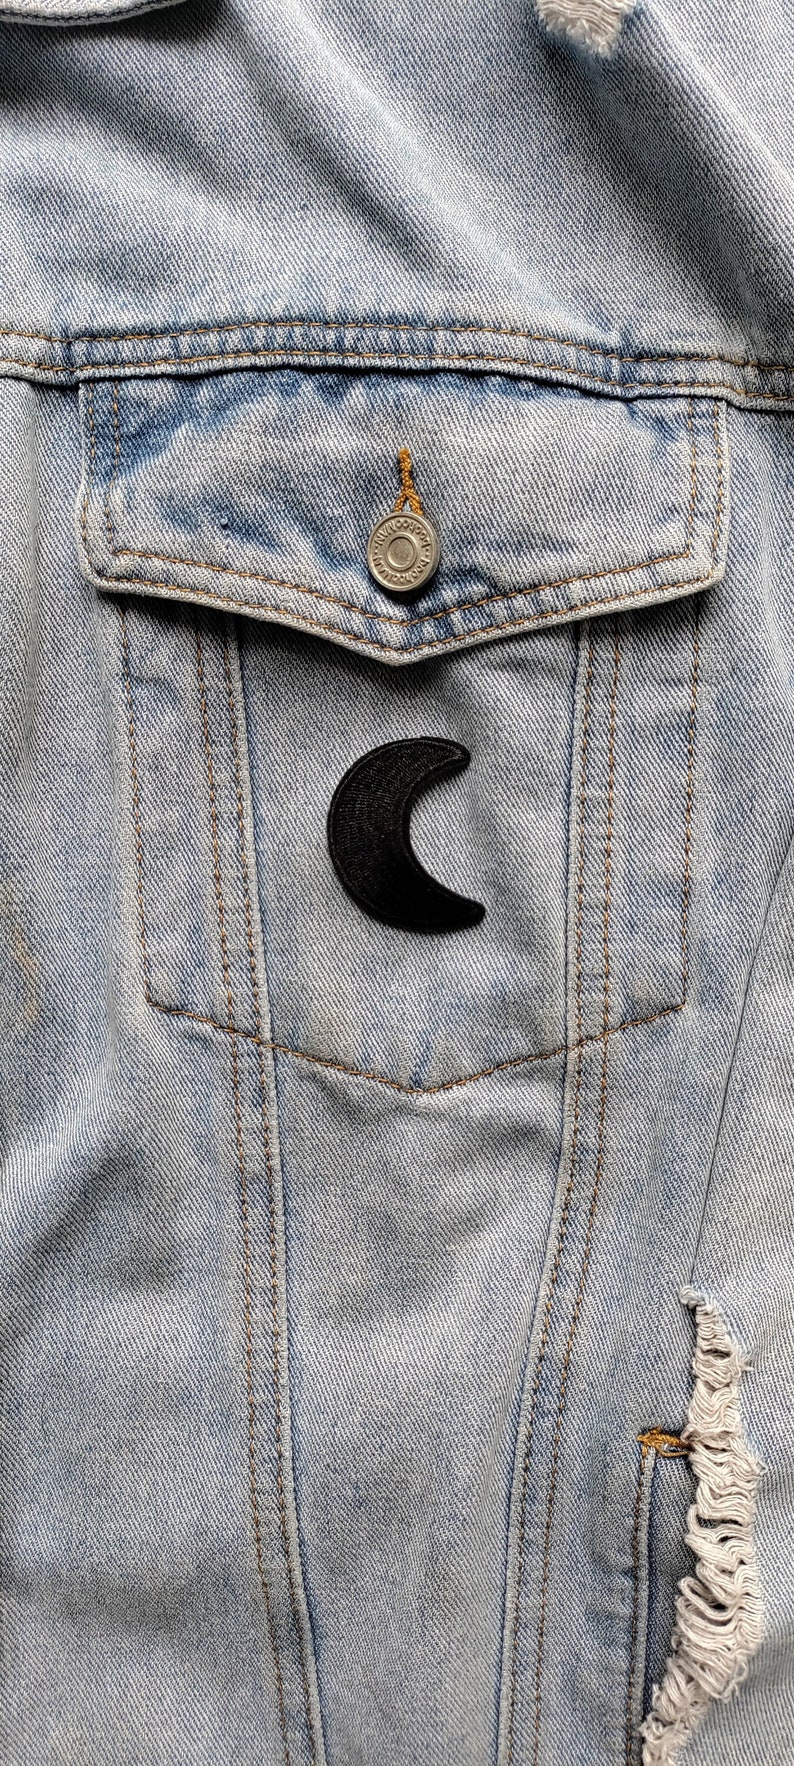 Mini Crescent // Moon DIY Embroidered Patch Iron Sew On Applique Badge Black Gothic Celestial Aesthetic Craft Motif Gift Idea For Jackets UK zdjęcie 1